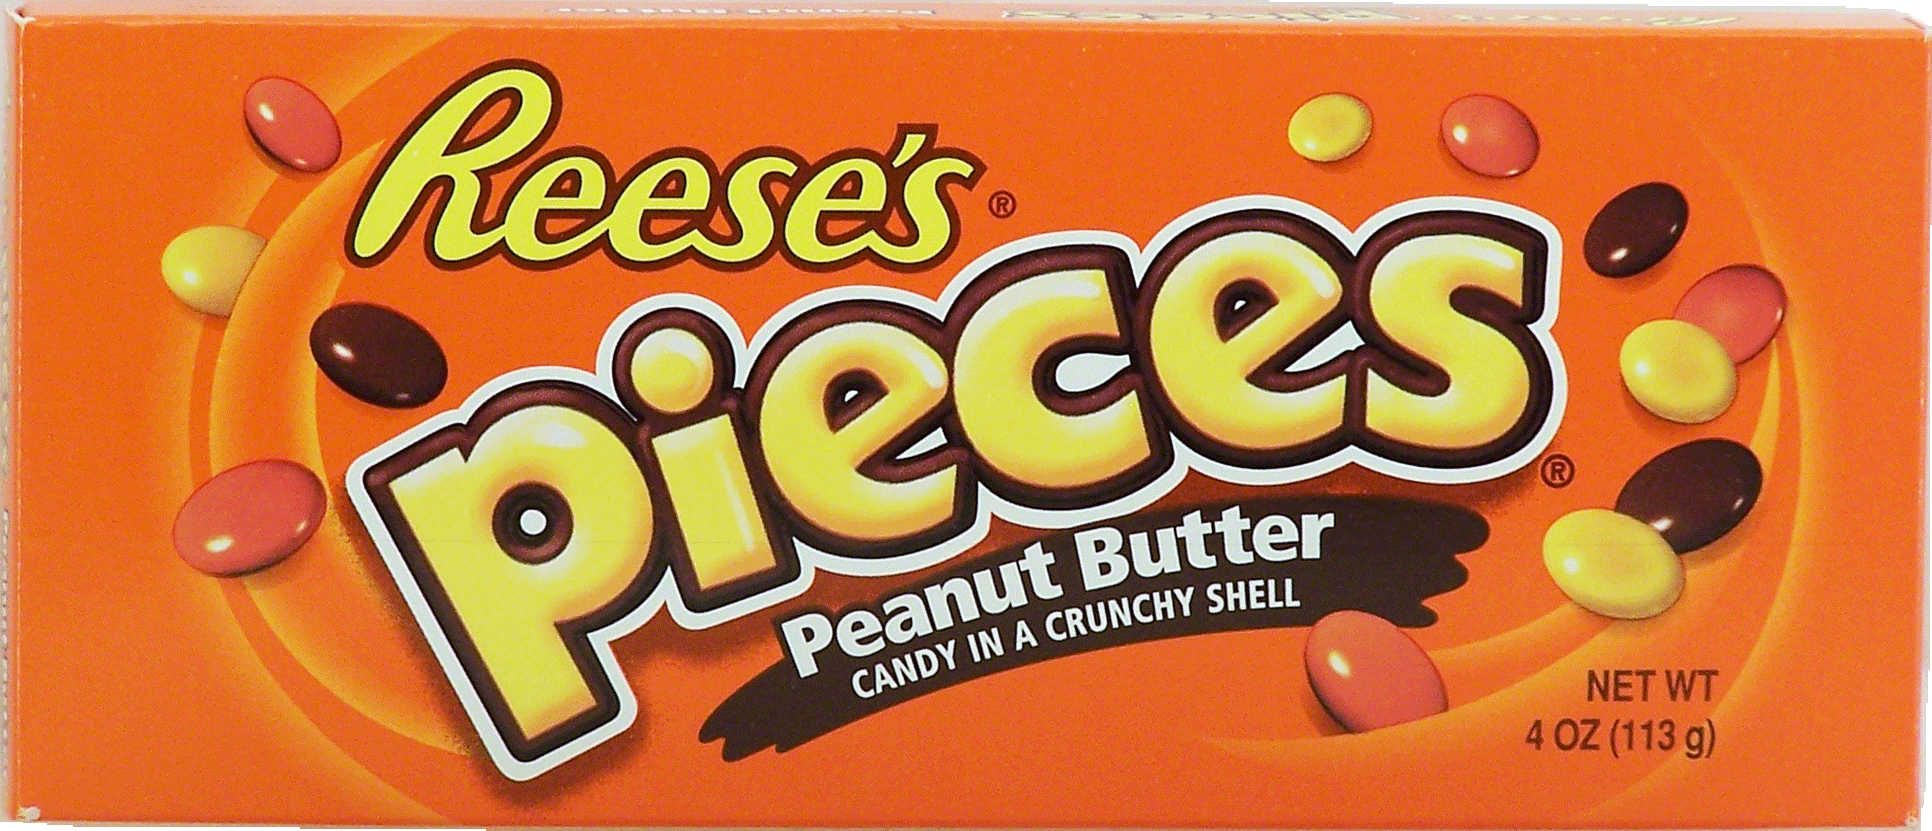 Reese's pieces peanut butter candy in a crunchy shell Full-Size Picture